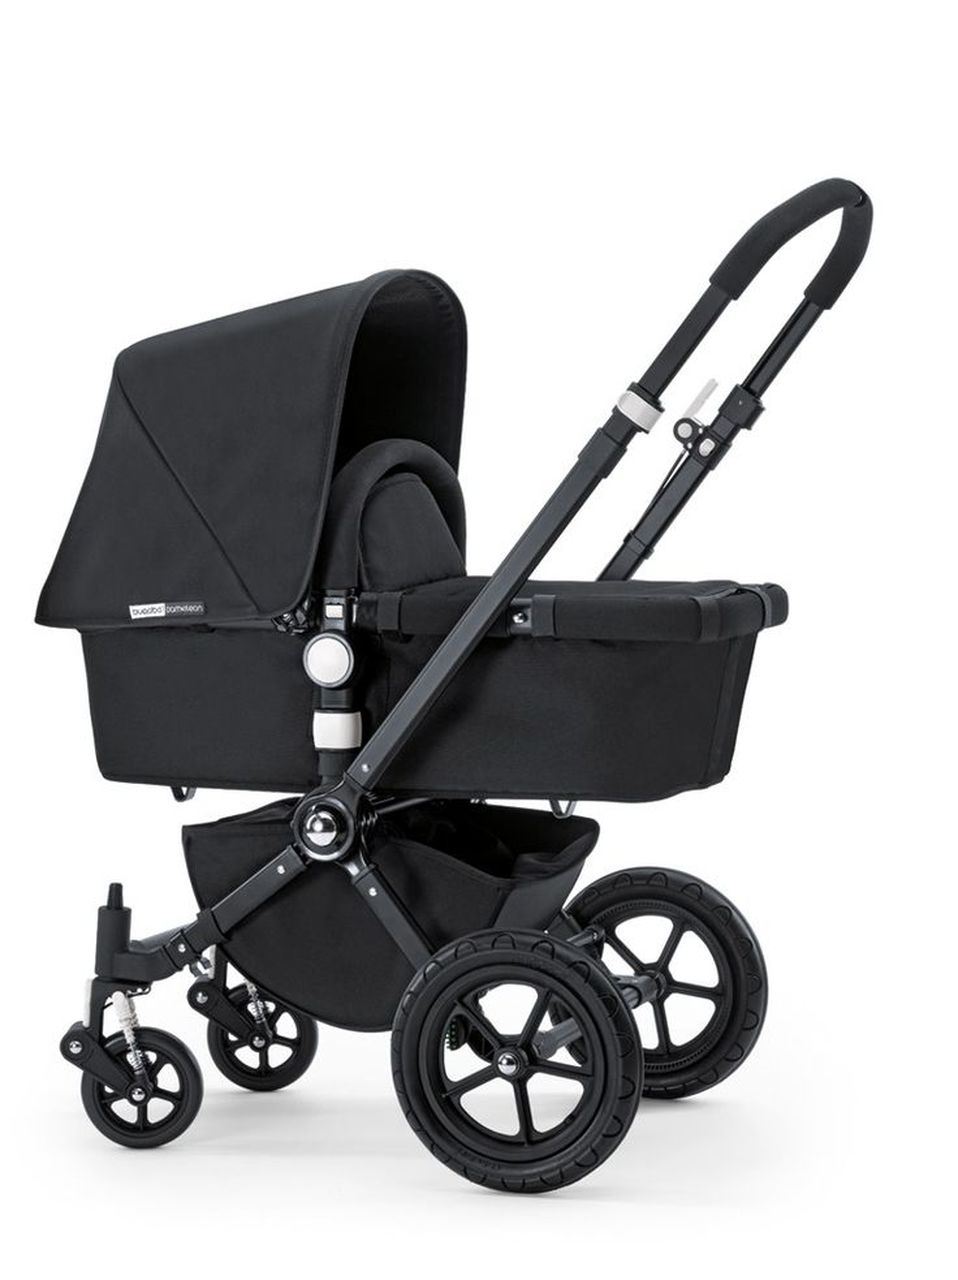 Bugaboo Serial Number 7 Digits